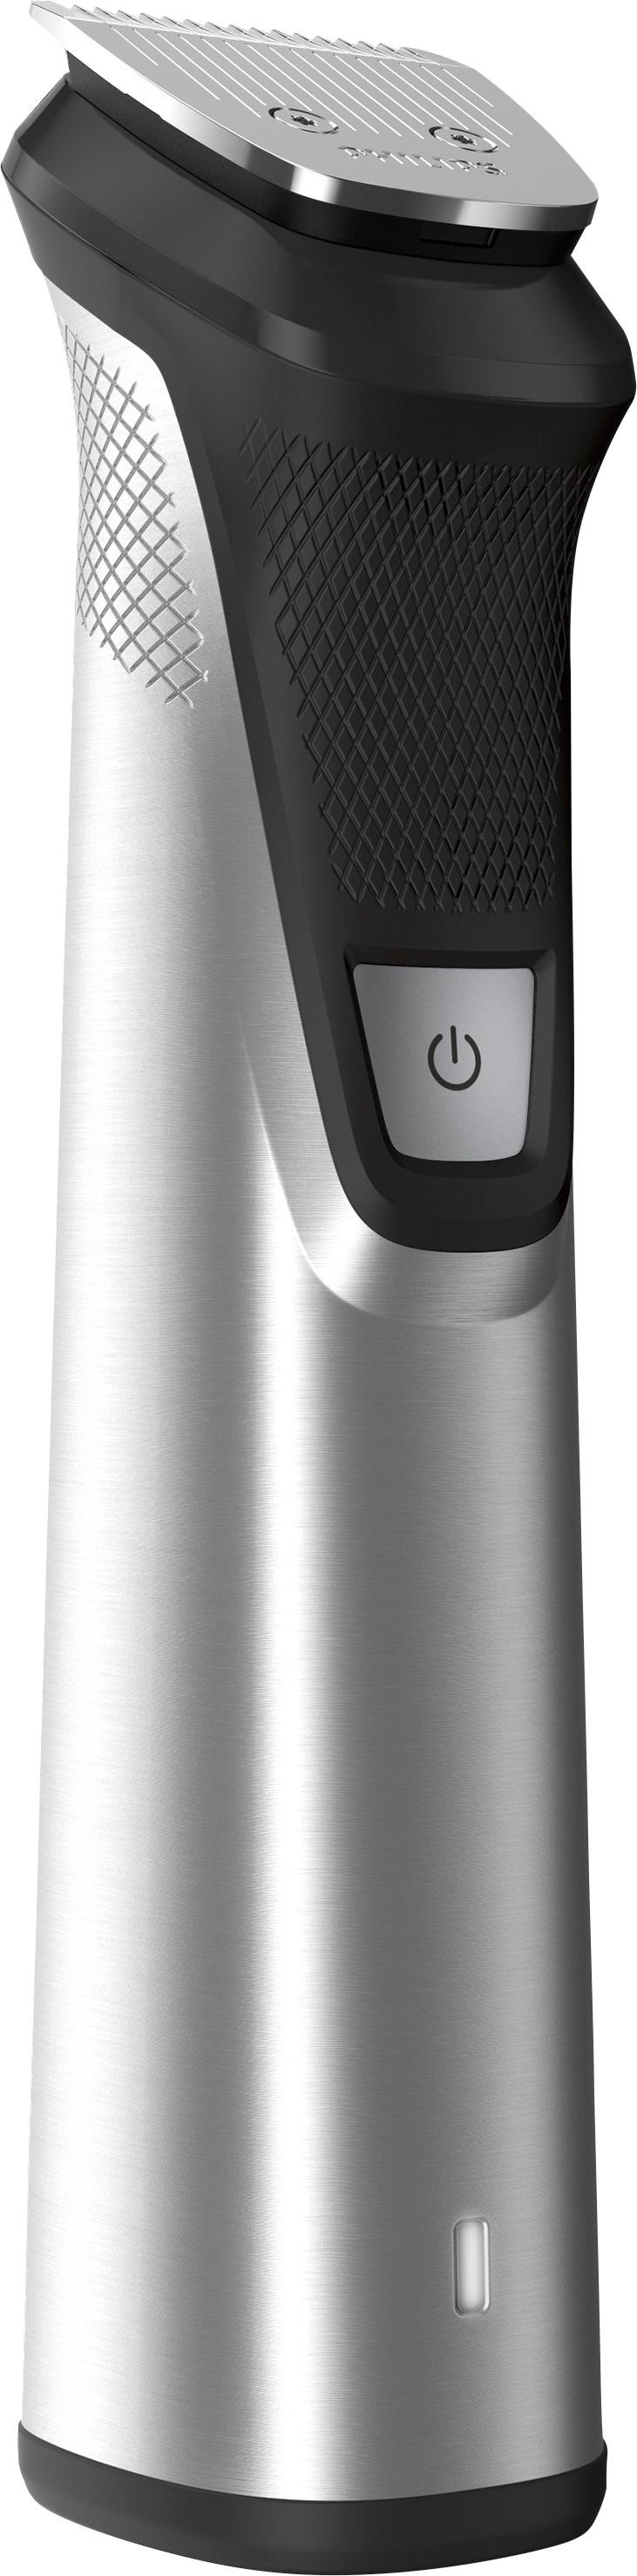 philips 7000 trimmer review